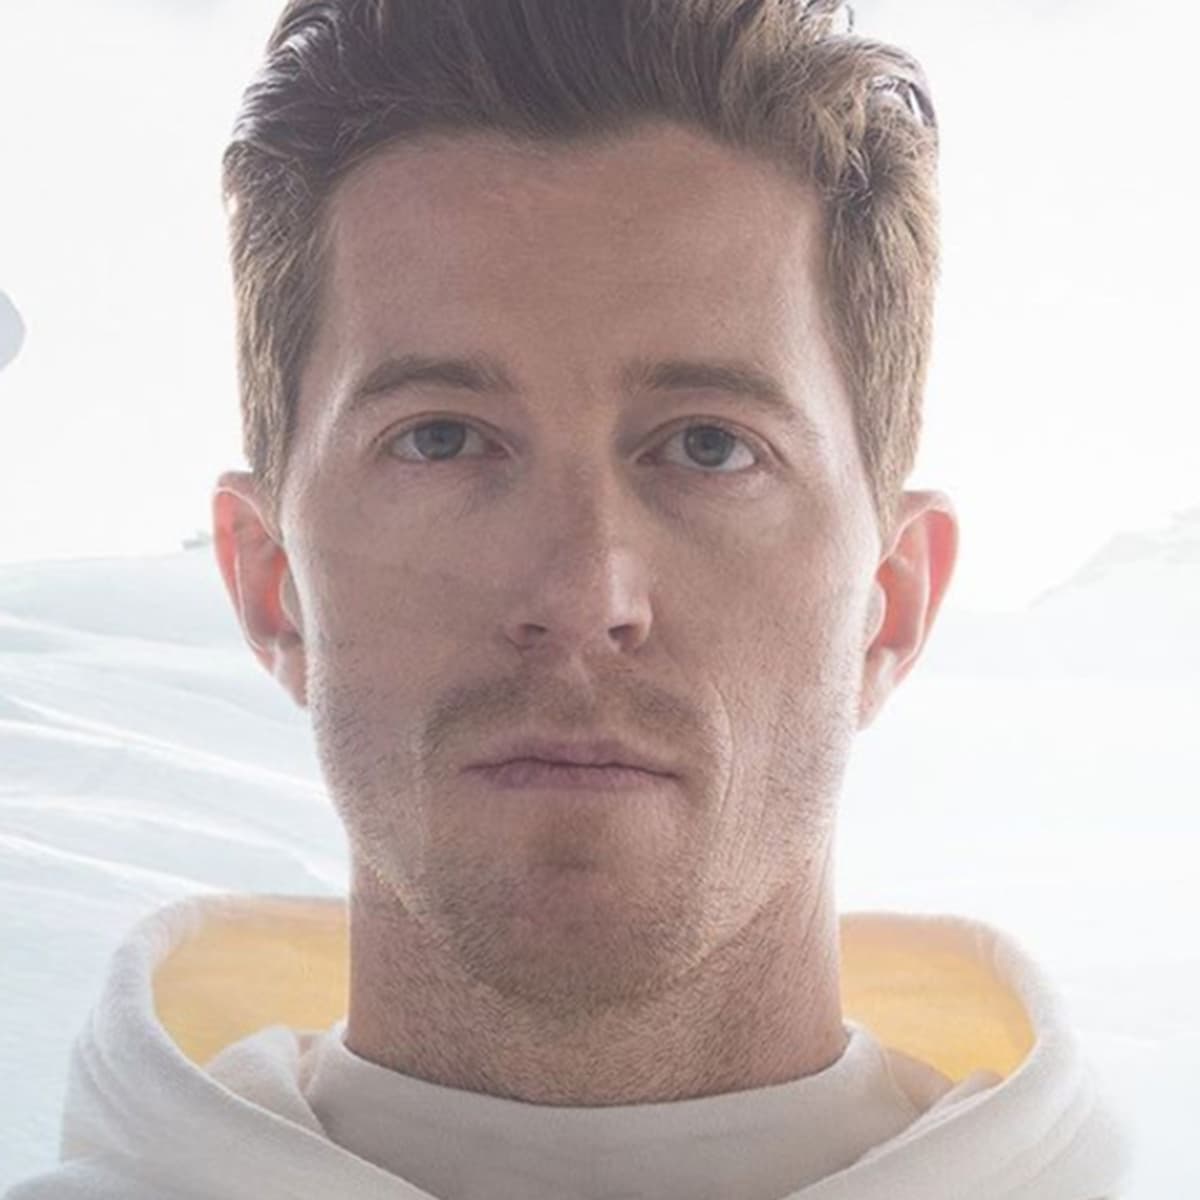 Shaun White Documentary Is Coming To HBO - Snowboarder